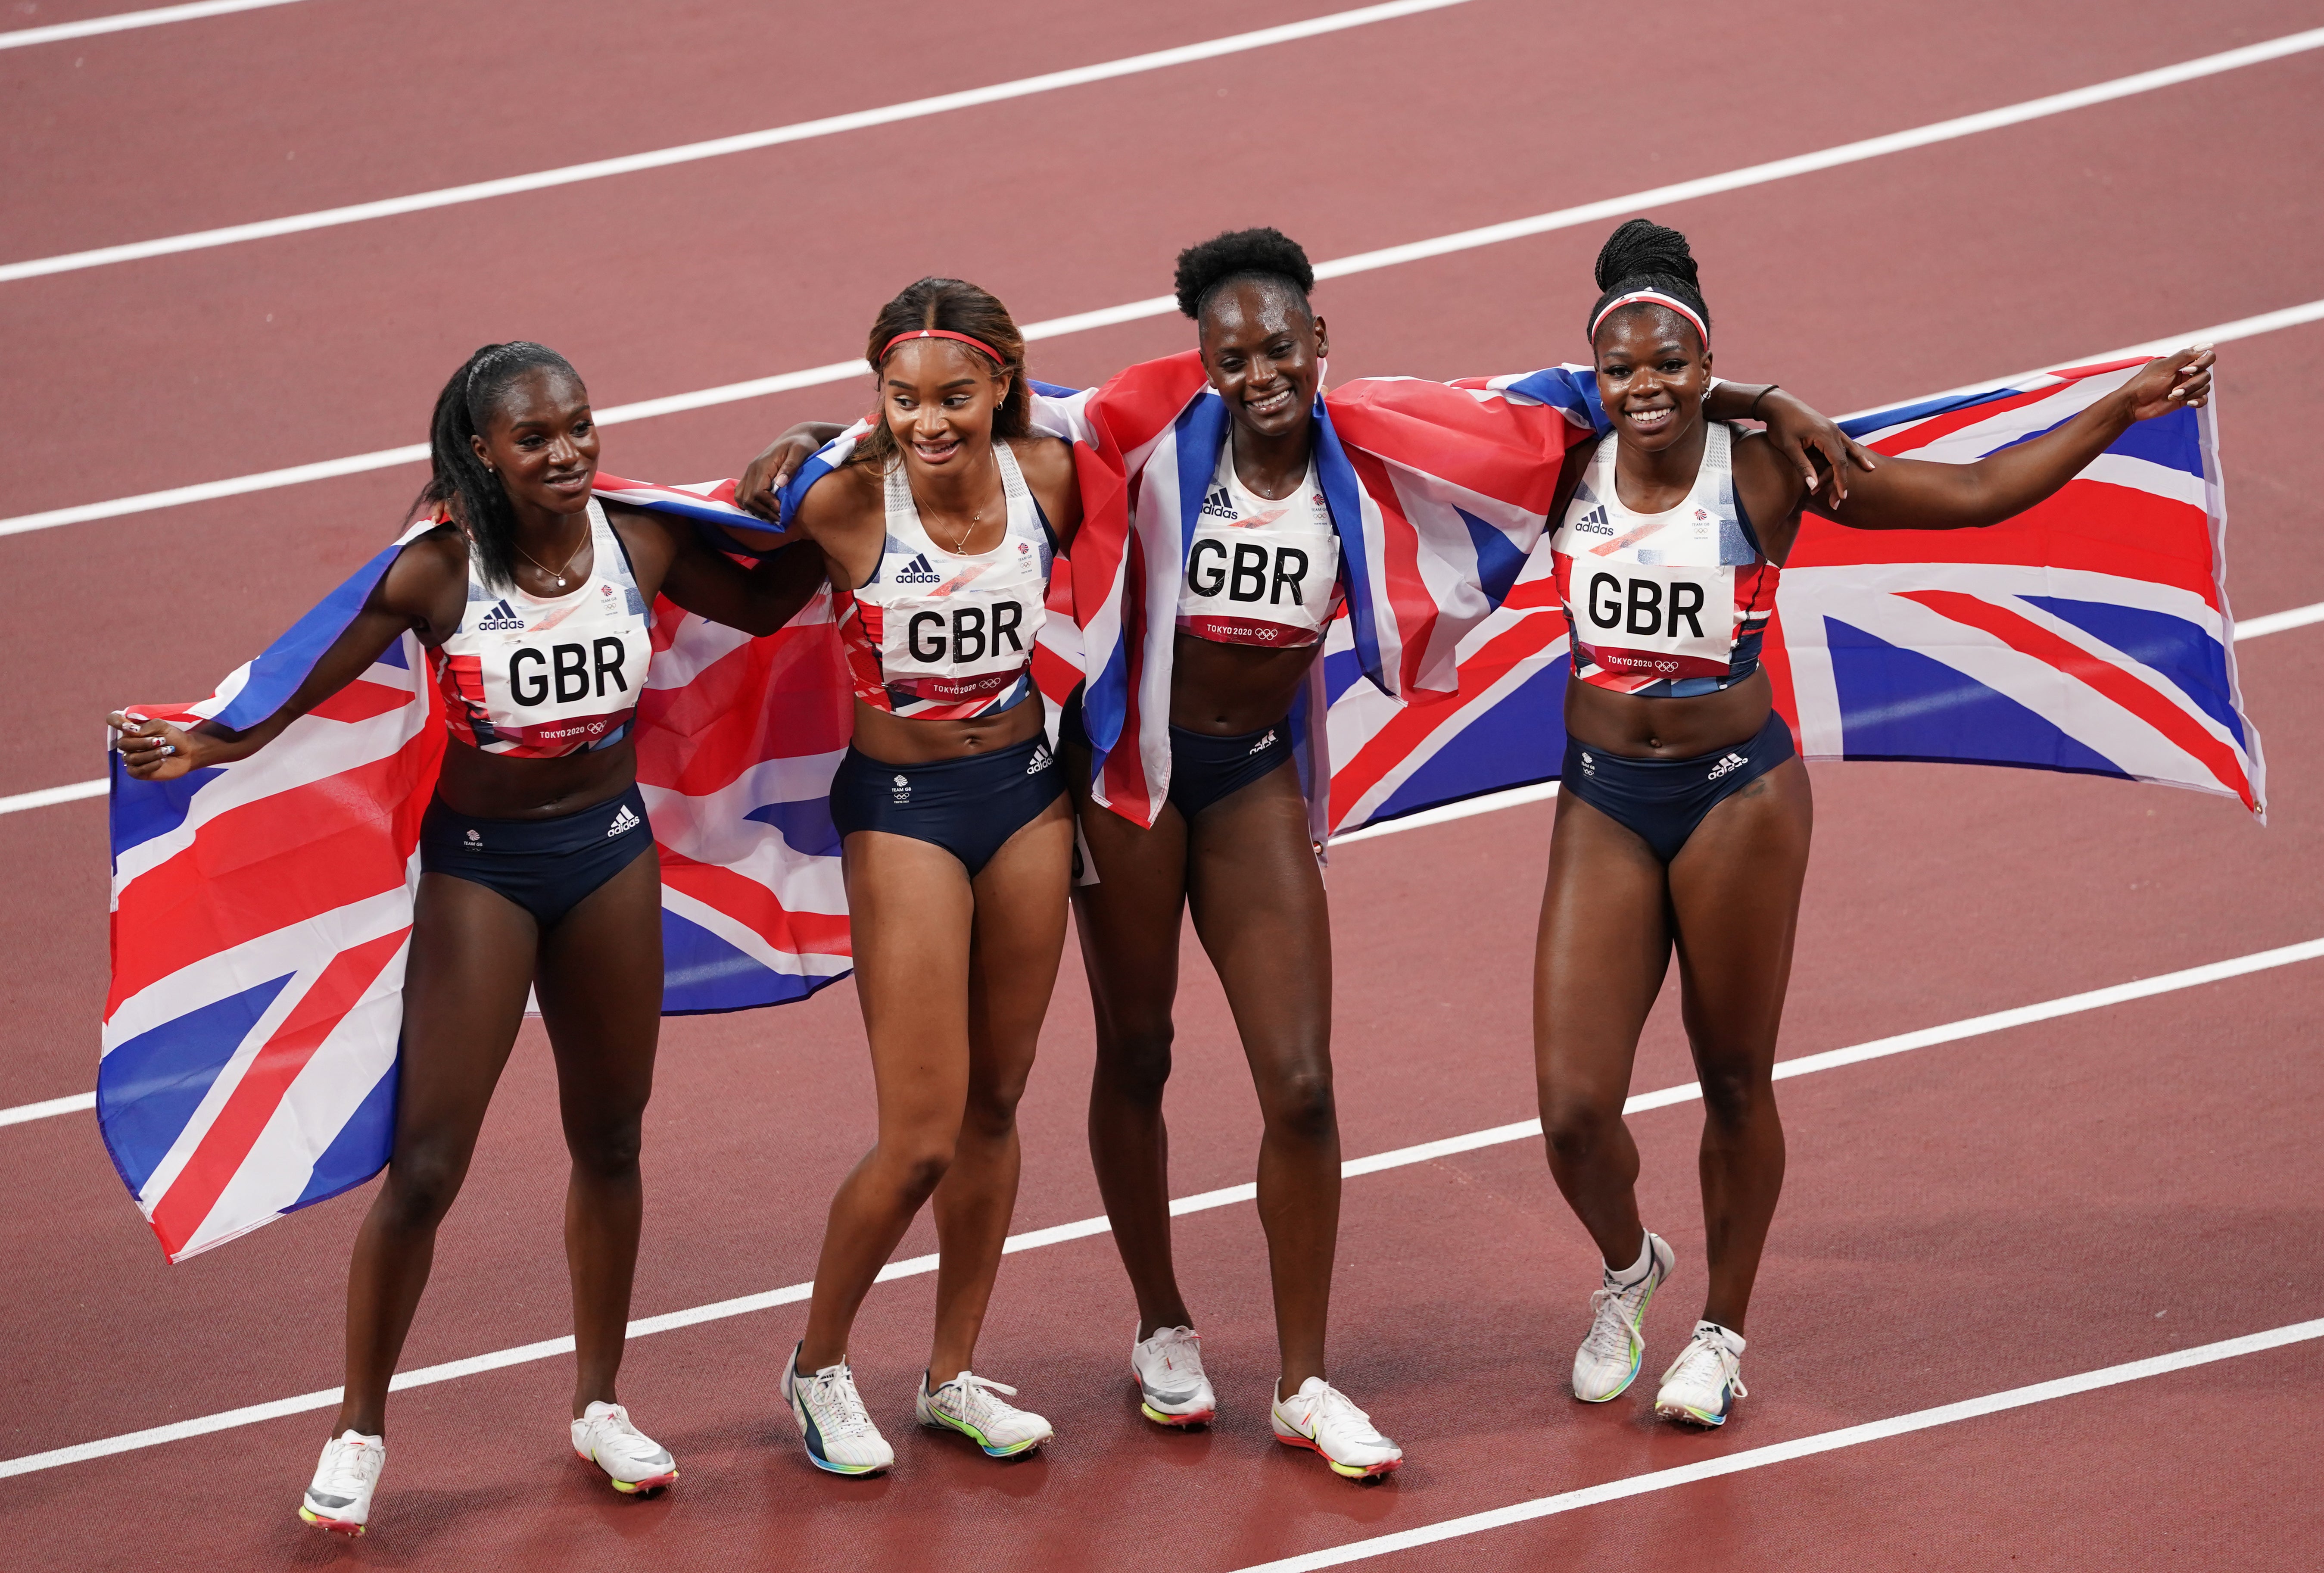 Great Britain’s Dina Asher-Smith Imani Lansiquot, Daryll Neita, and Asha Philip after winning the bronze medal in the women’s 4 x 100m relay.